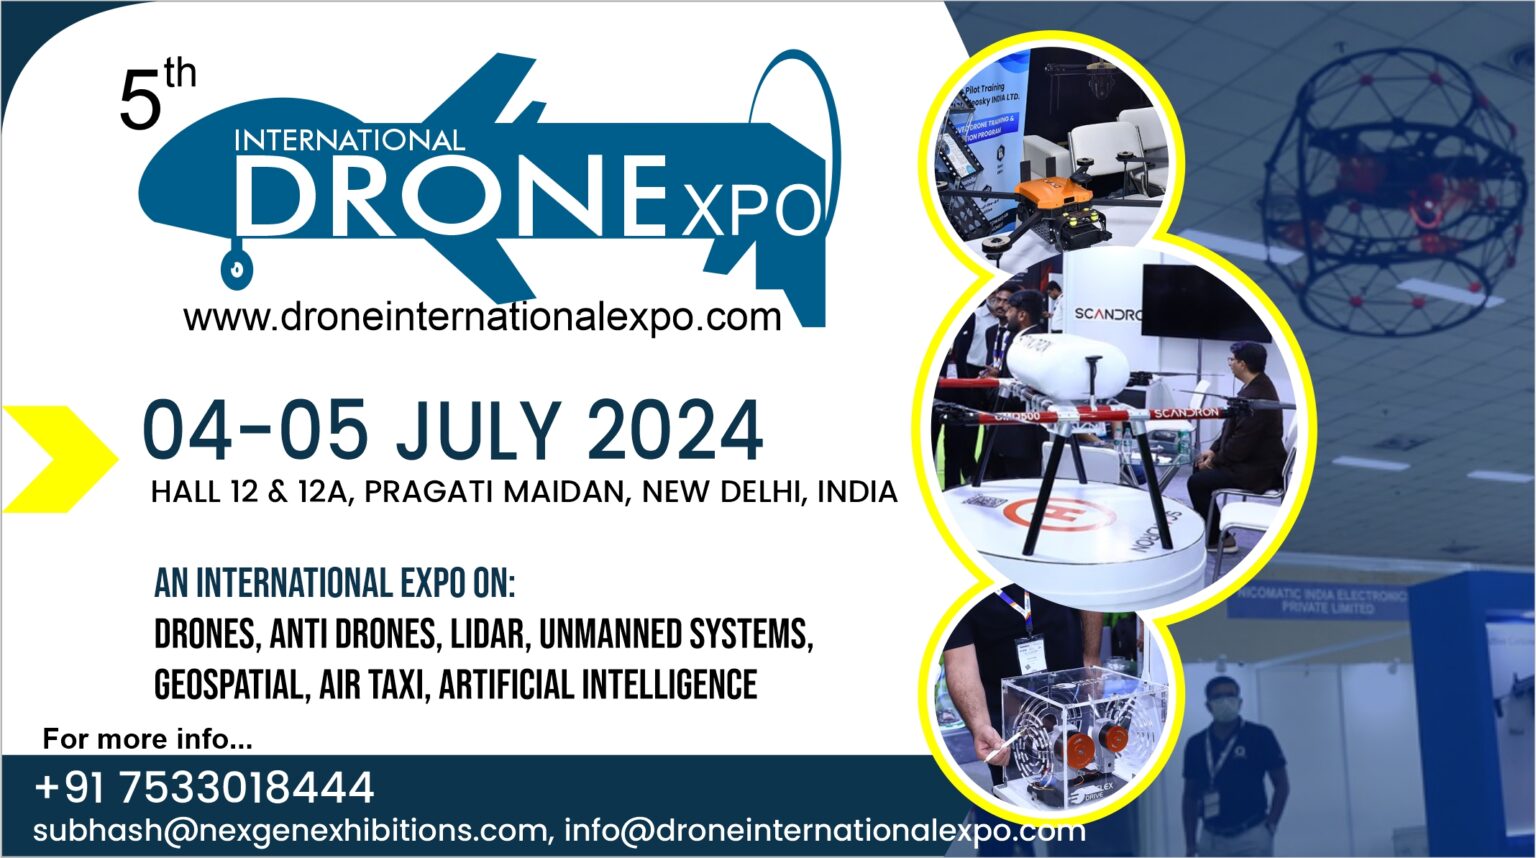 INTERNATIONAL DRONE EXPO 2024 Unmanned Network